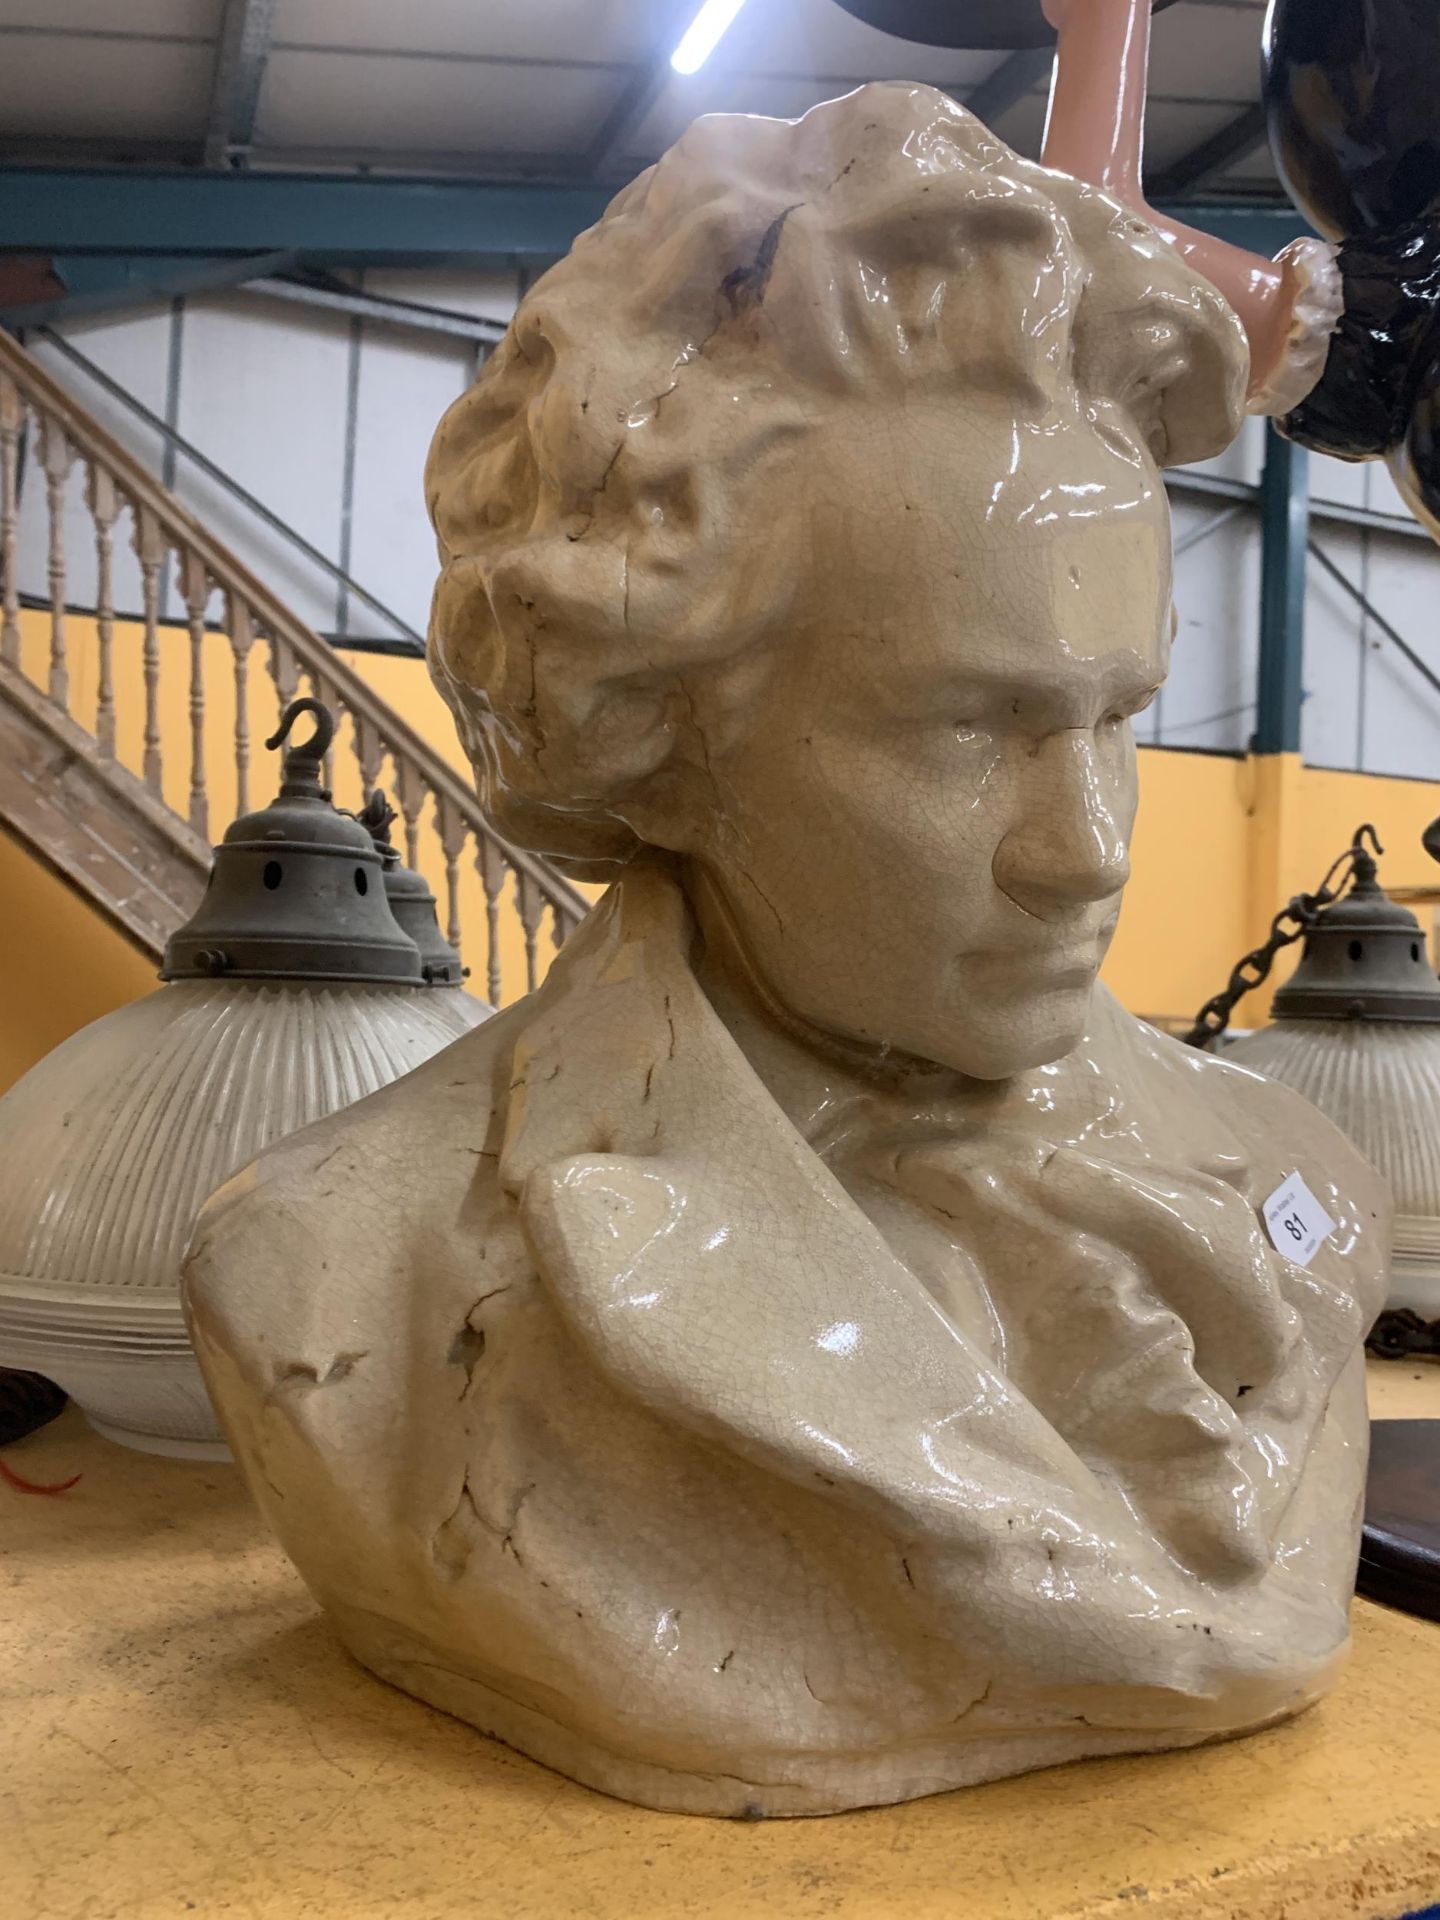 A VINTAGE LARGE HEAVY CERAMIC BUST OF BEETHOVEN - Image 2 of 3